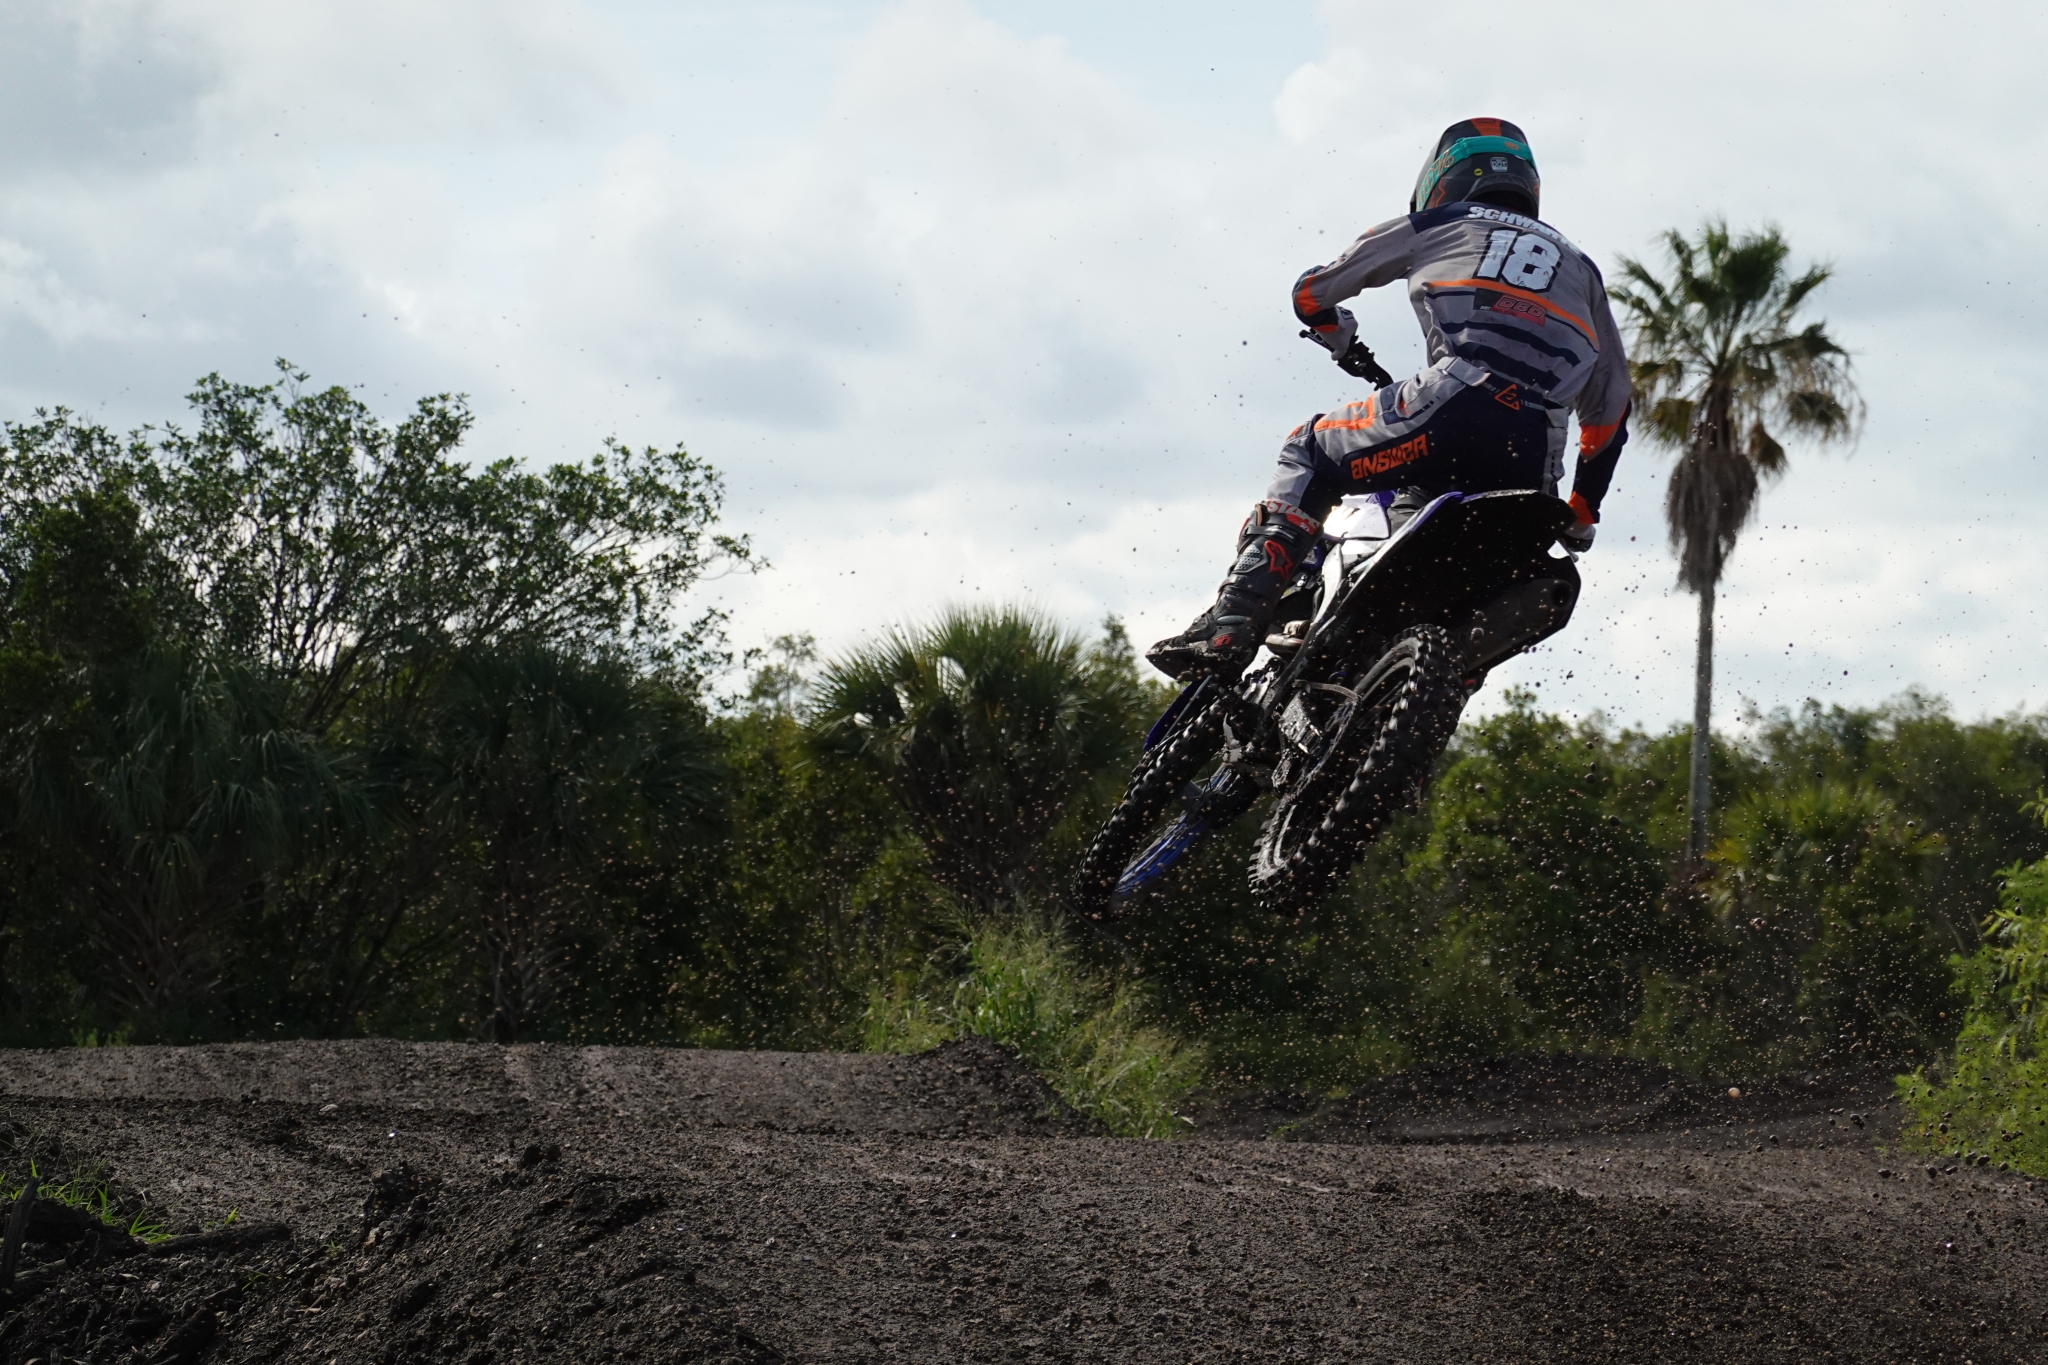 Rider on a motorcross bike on a dirt track